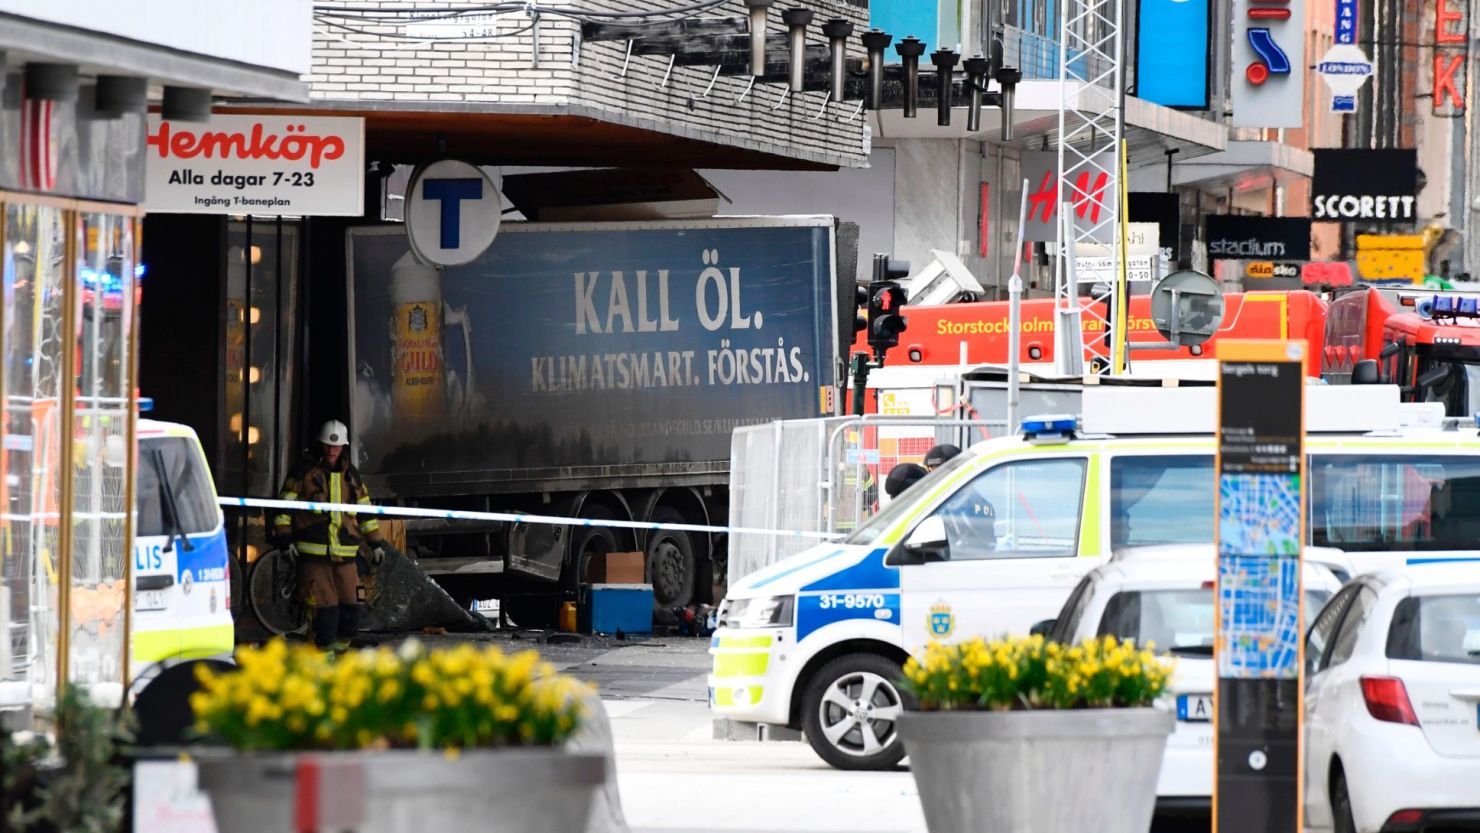 Emergency services work at the scene where a truck crashed into the Ahlens department store in central Stockholm on April 7. the truck hit pedestrians before it struck the store; four peole were killed, authorities said.